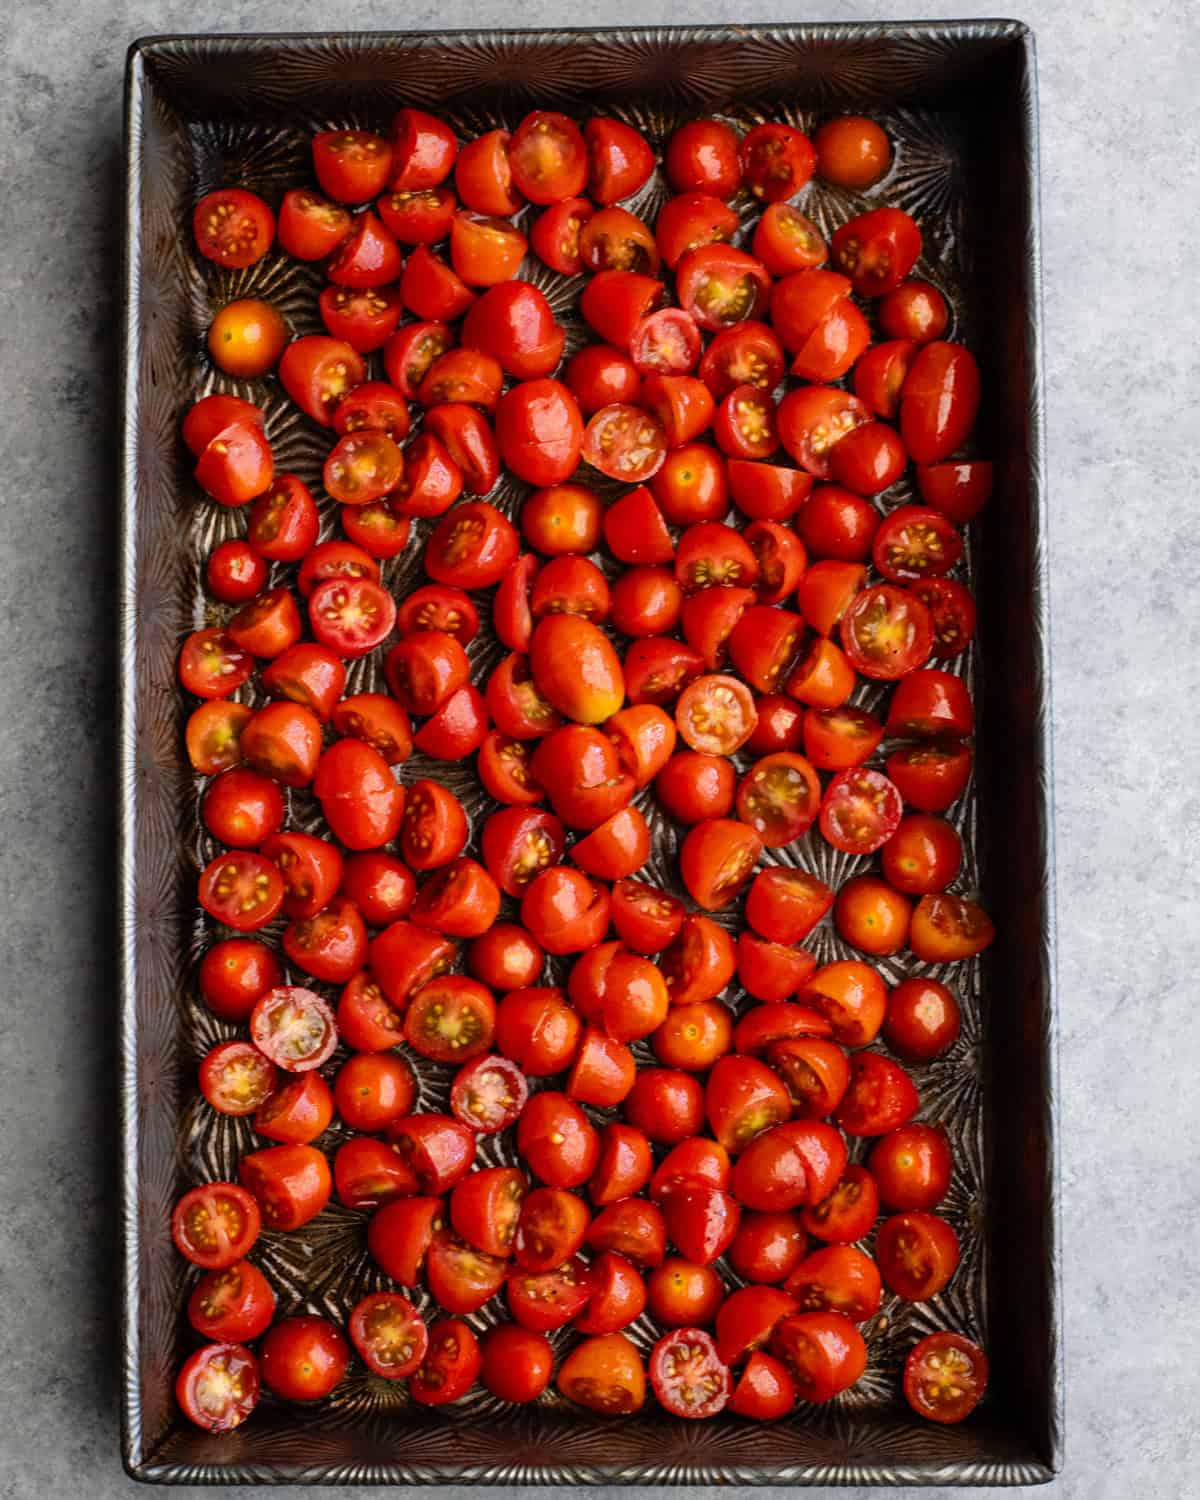 How to Make Pasta Salad - tomatoes on a baking sheet before roasting